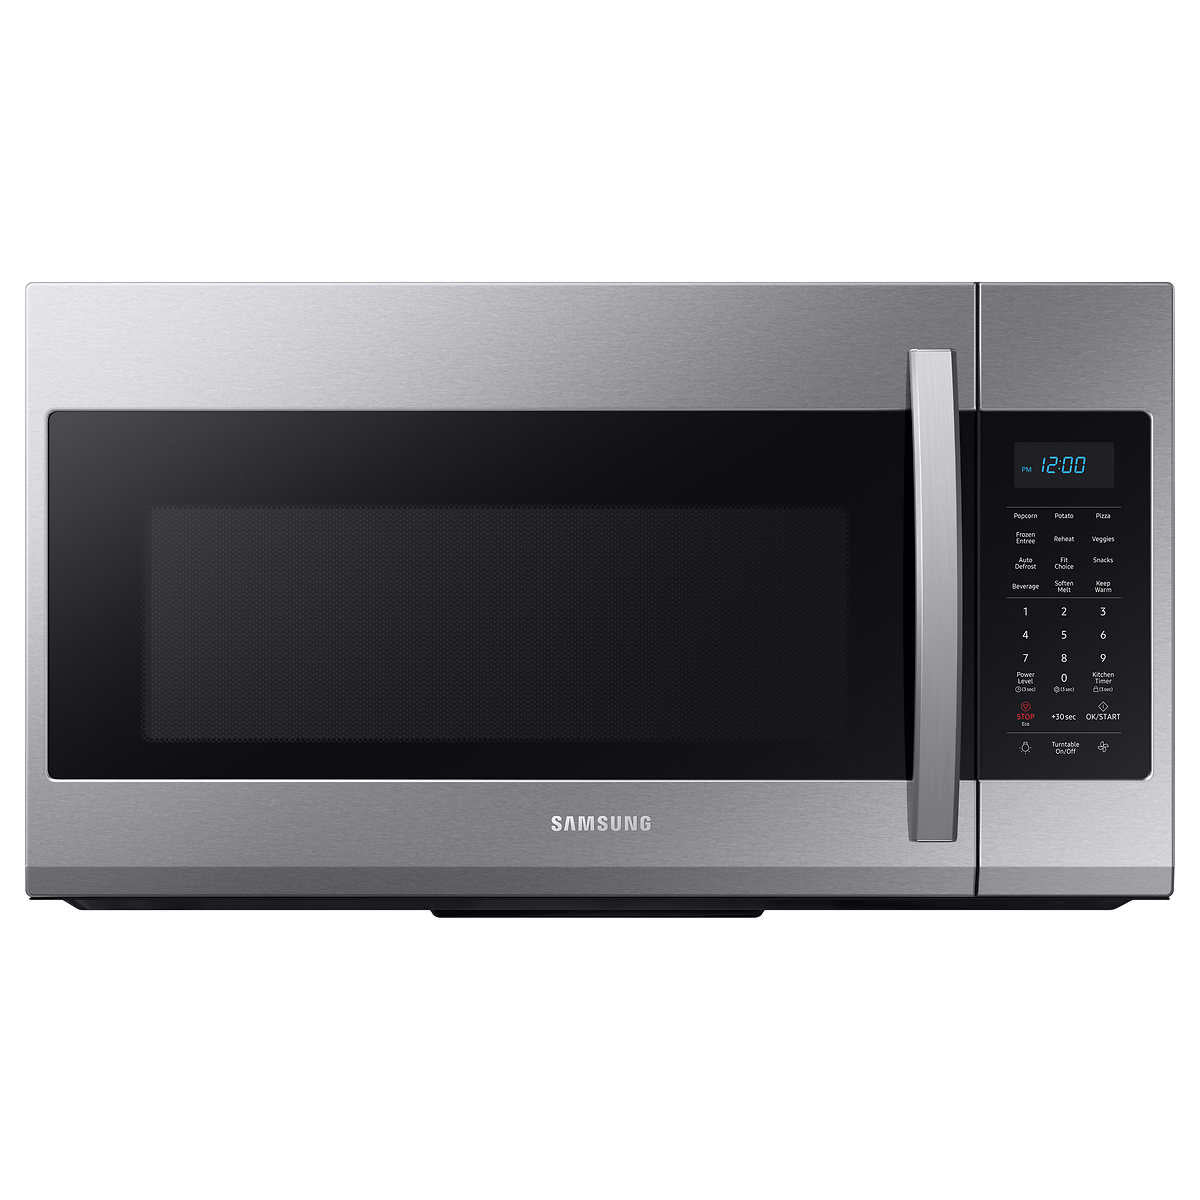 NEW - Samsung 1.9 Cu. Ft. Over-the-Range Microwave with Sensor Cook ME19R7041FS - Retail $419